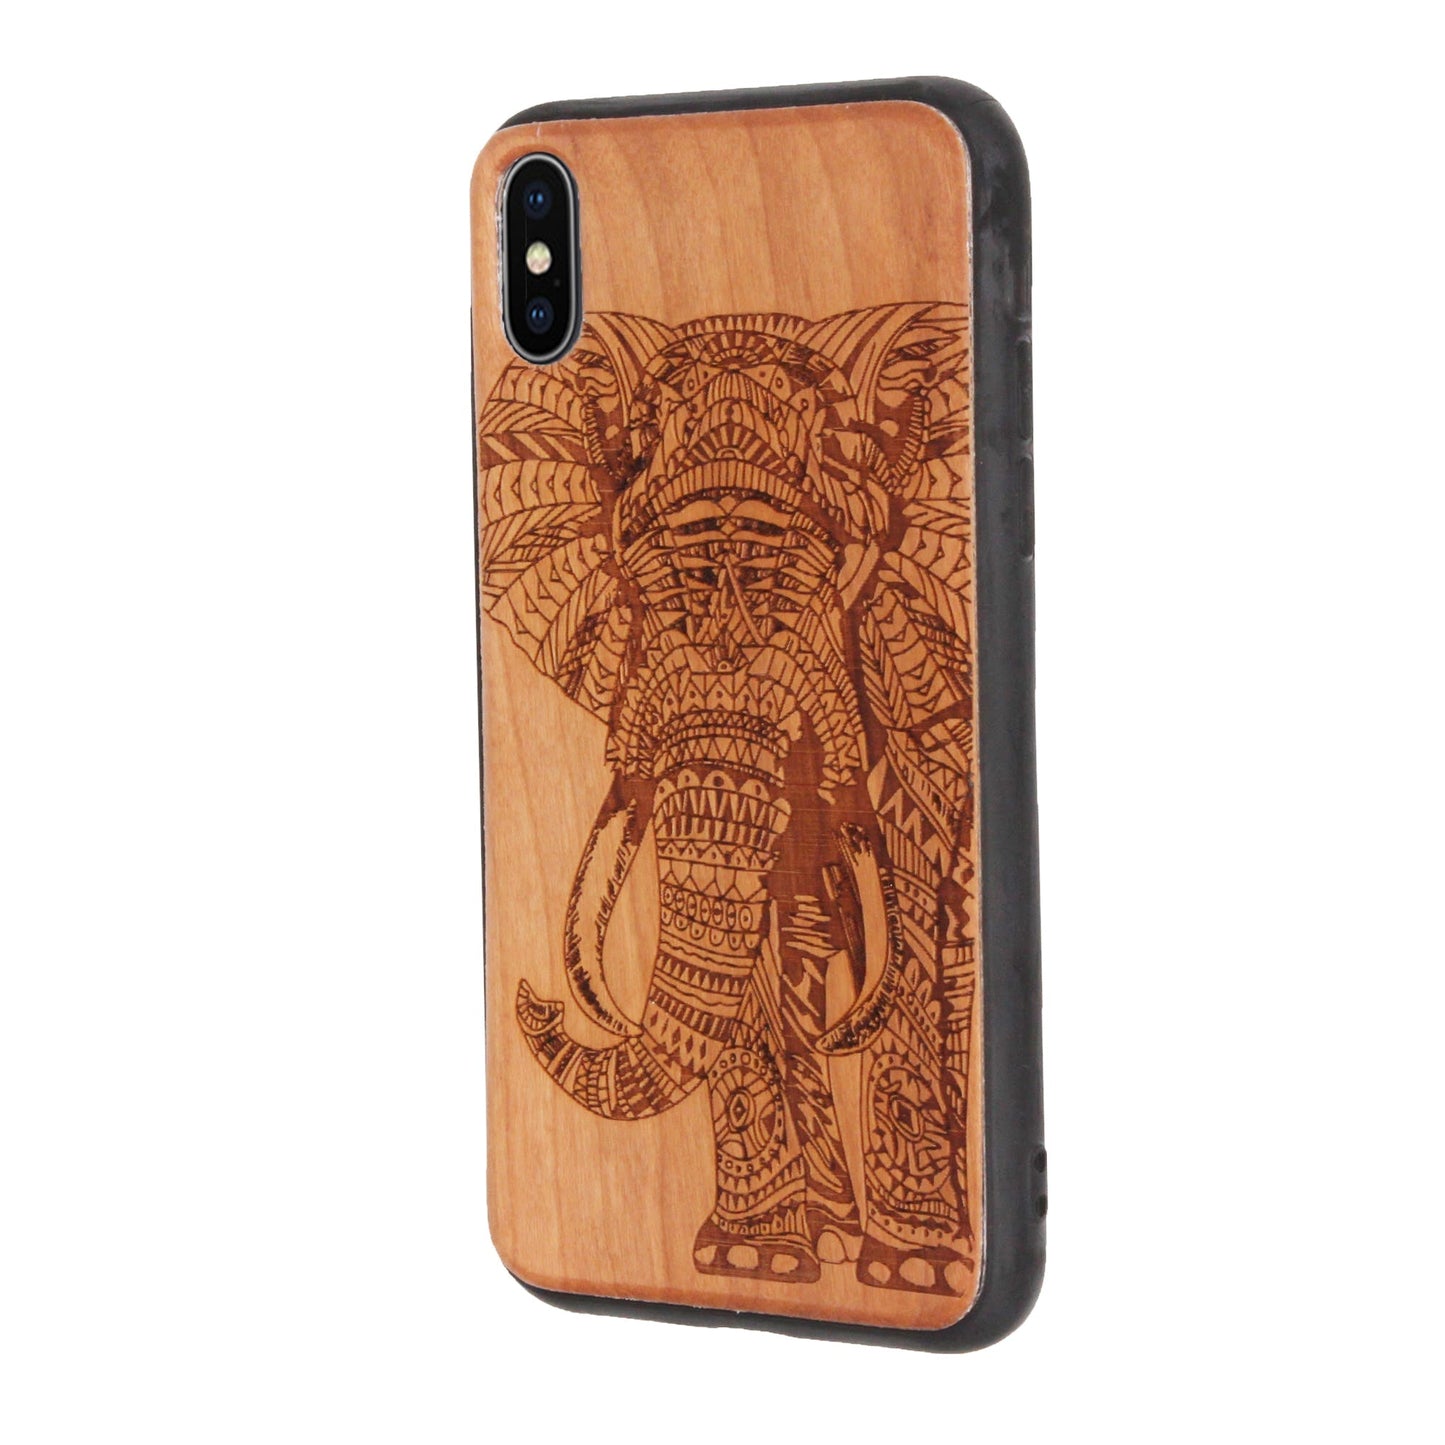 Cherry Wood Elephant Eden Case for iPhone XS Max